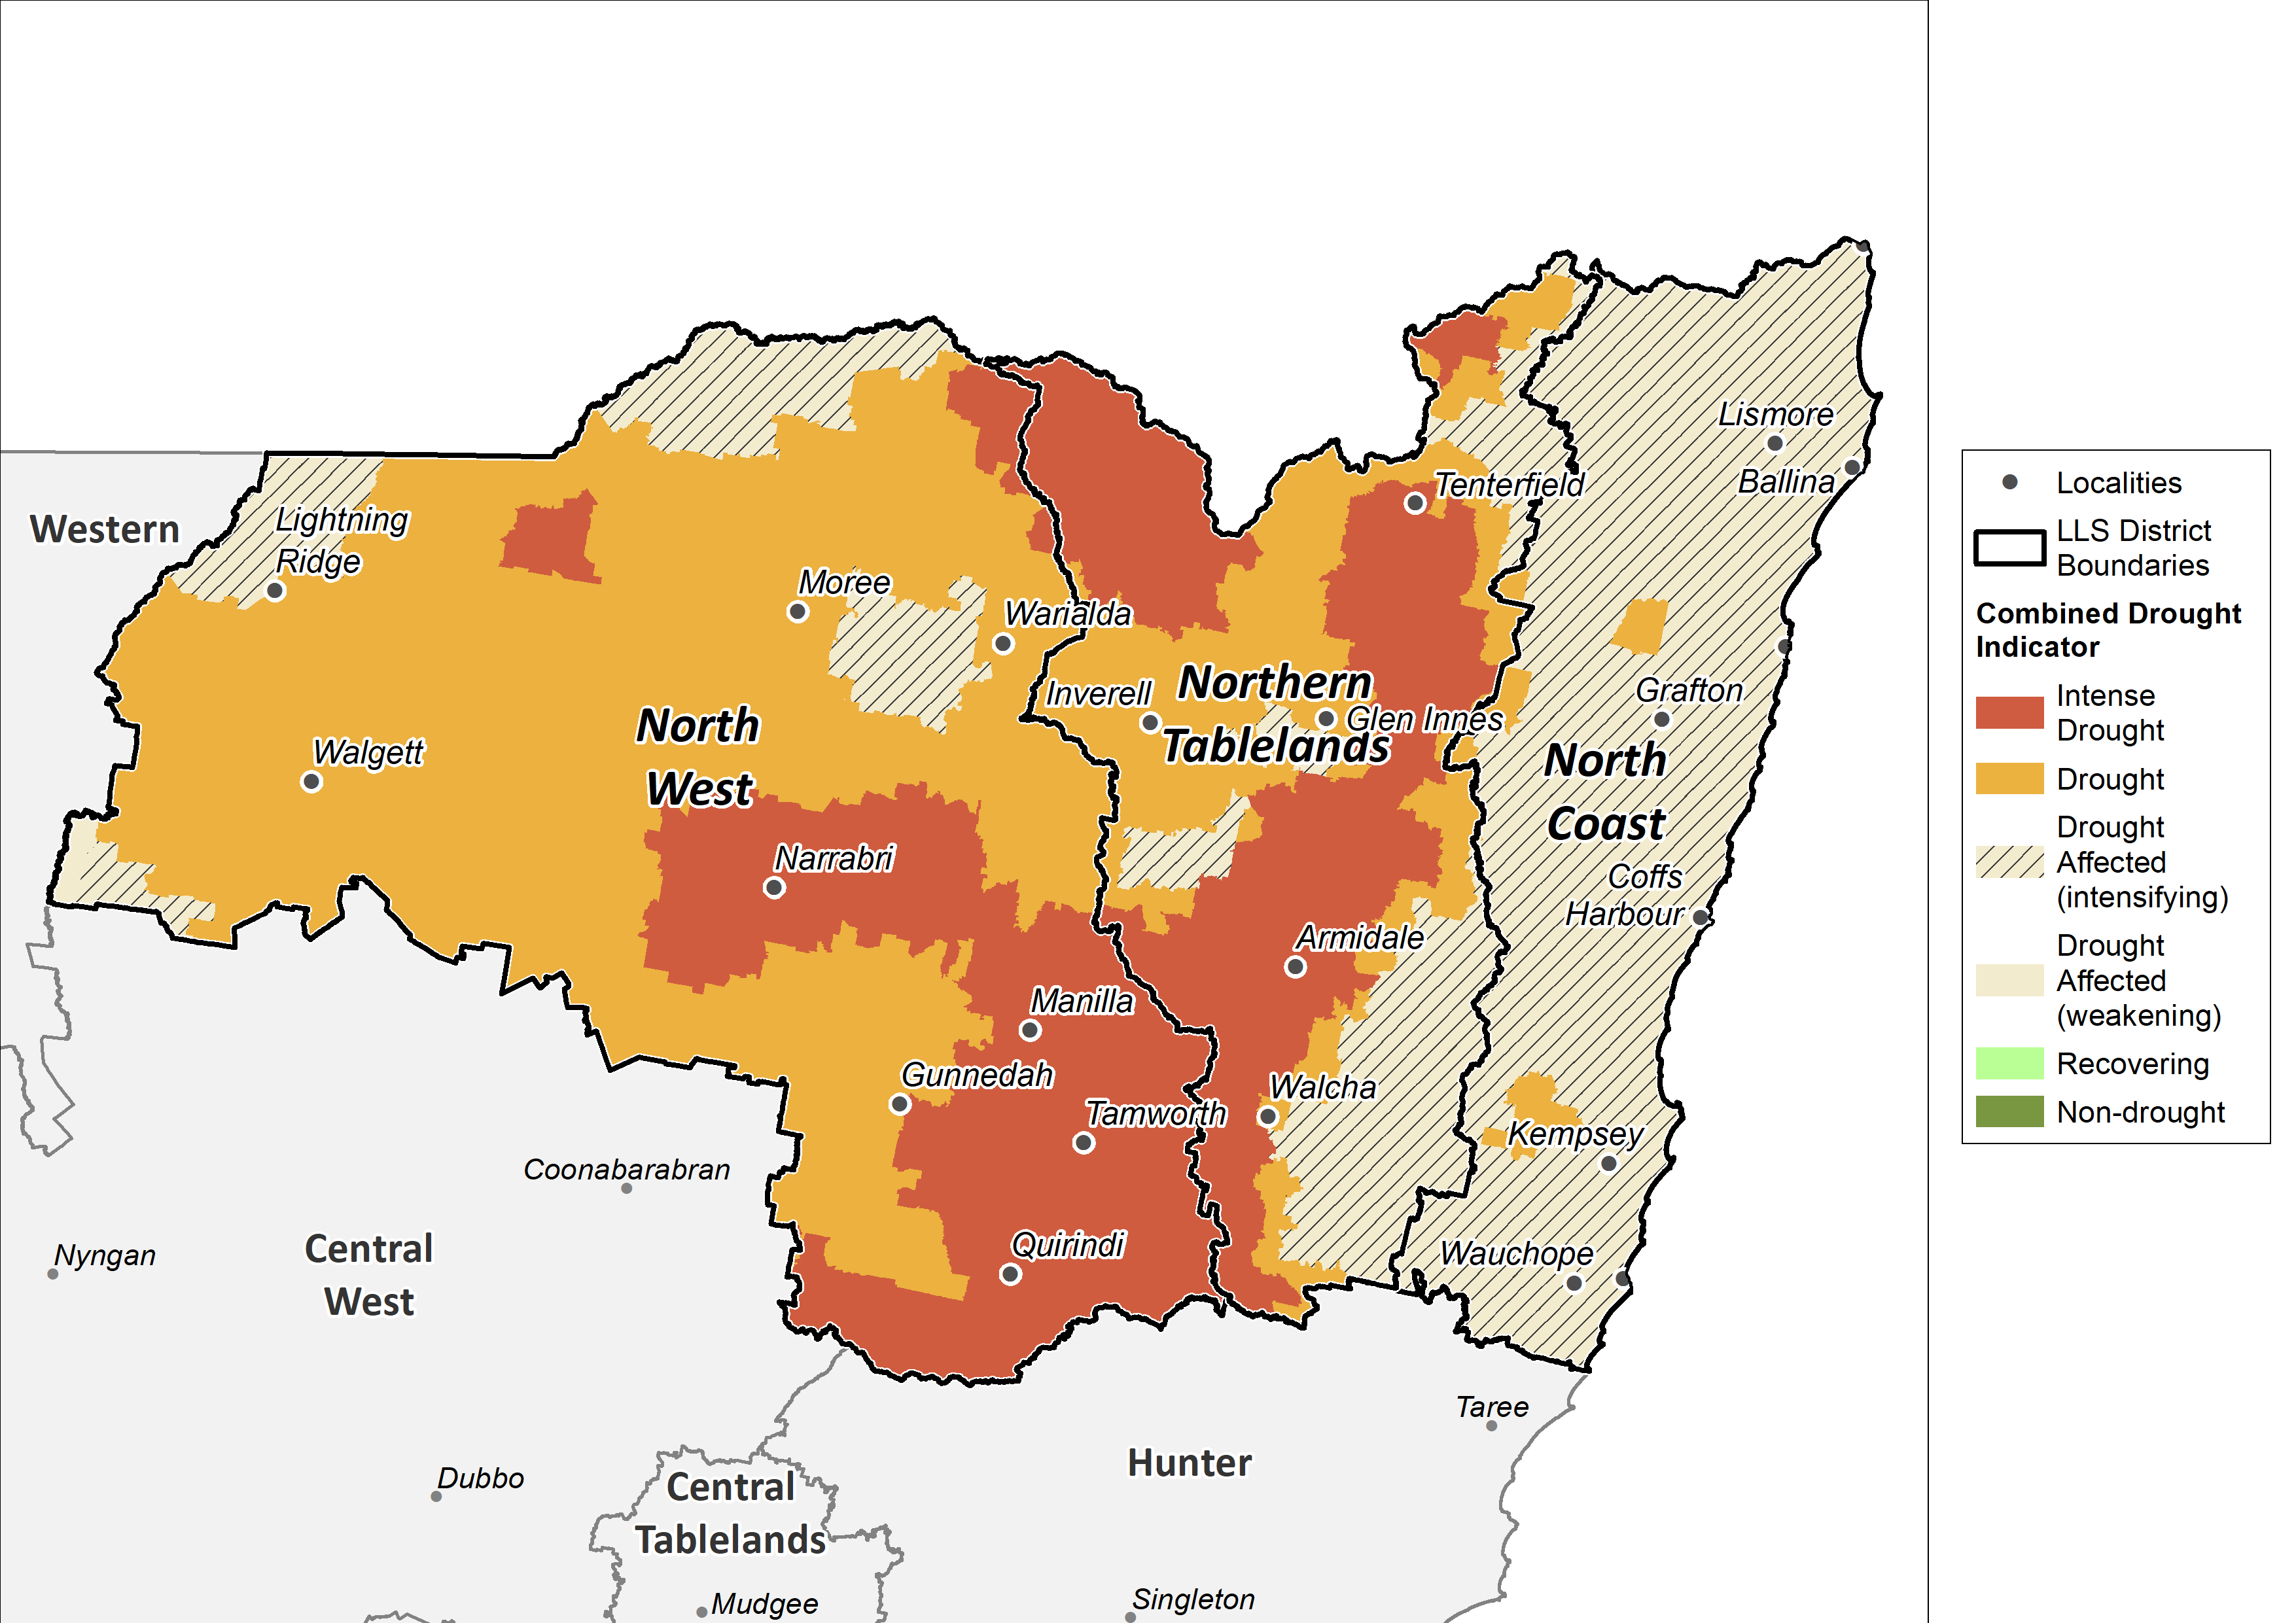 For an accessible explanation of this map contact the author kim.broadfoot@dpi.nsw.gov.au